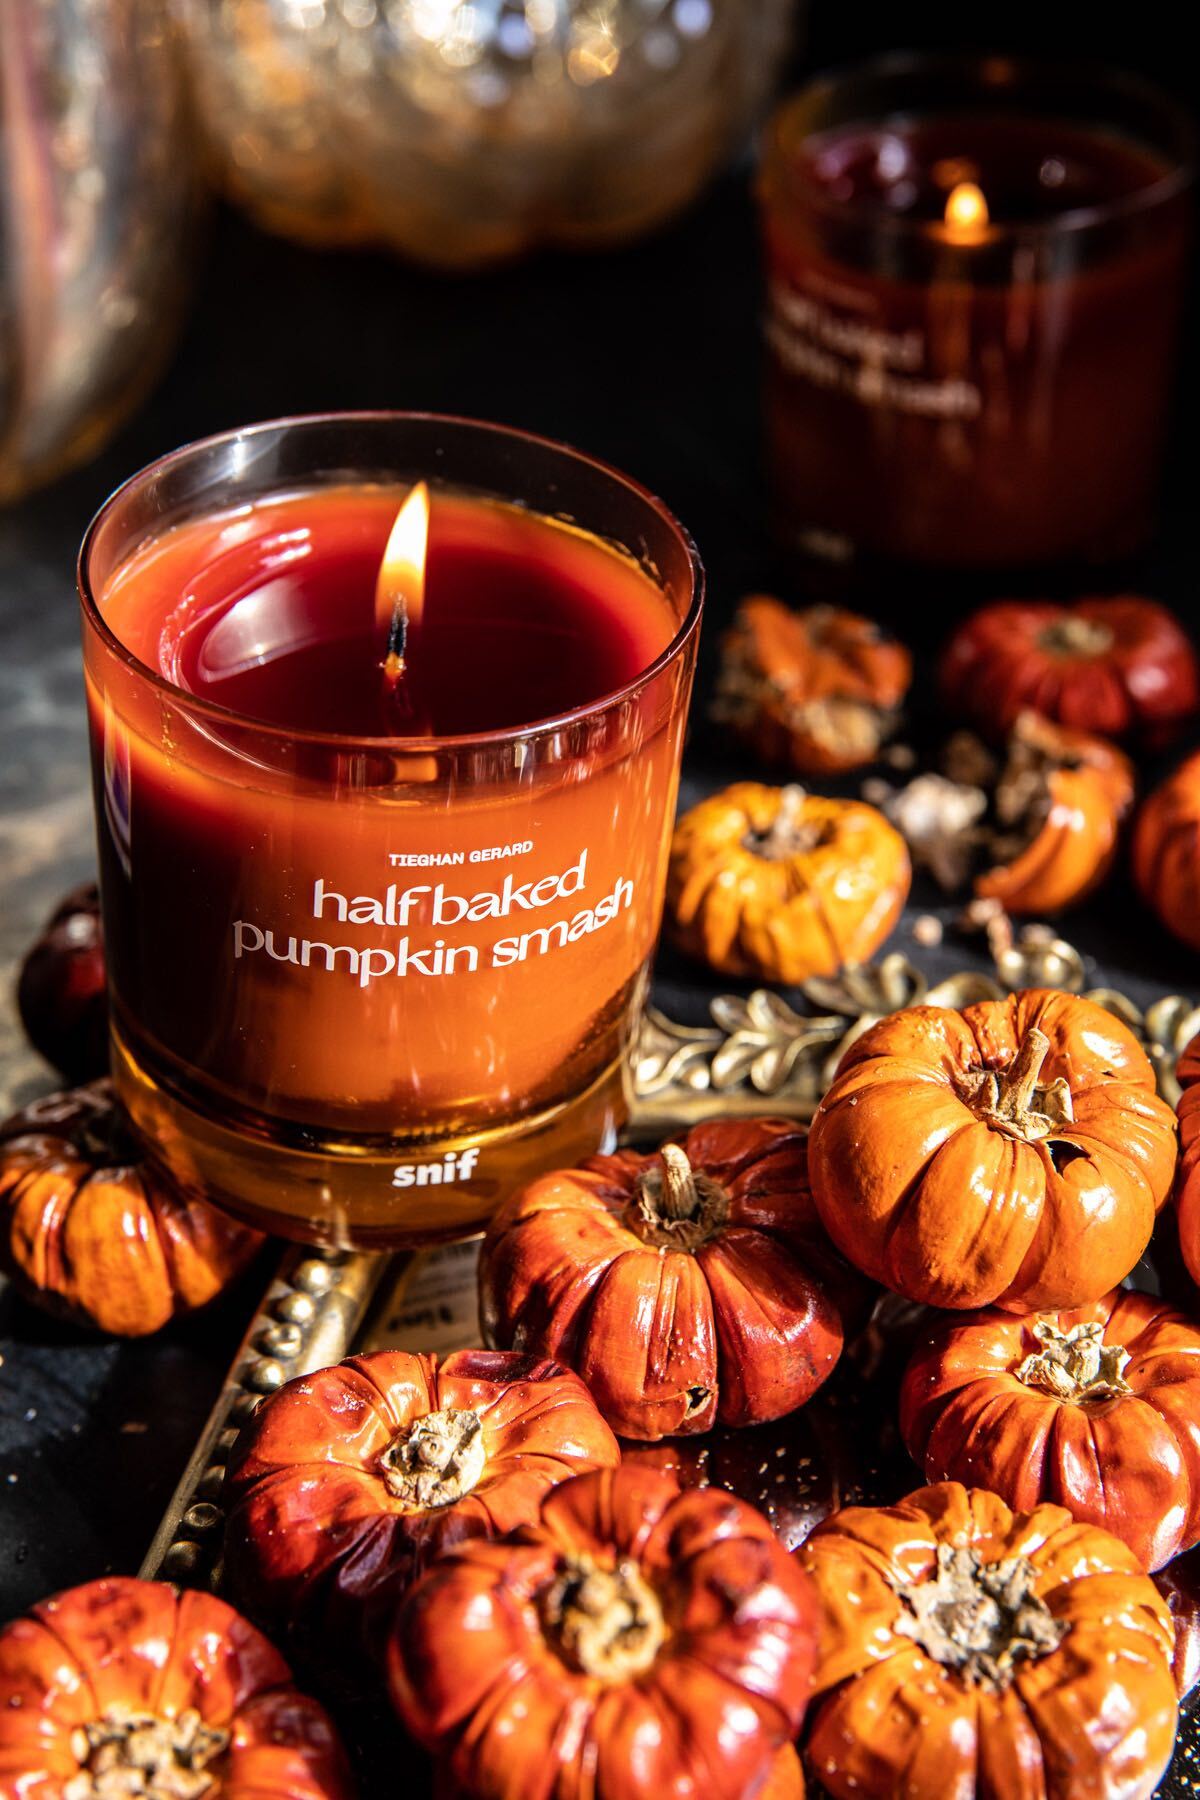 pumpkin smash candle from snif and half baked harvest